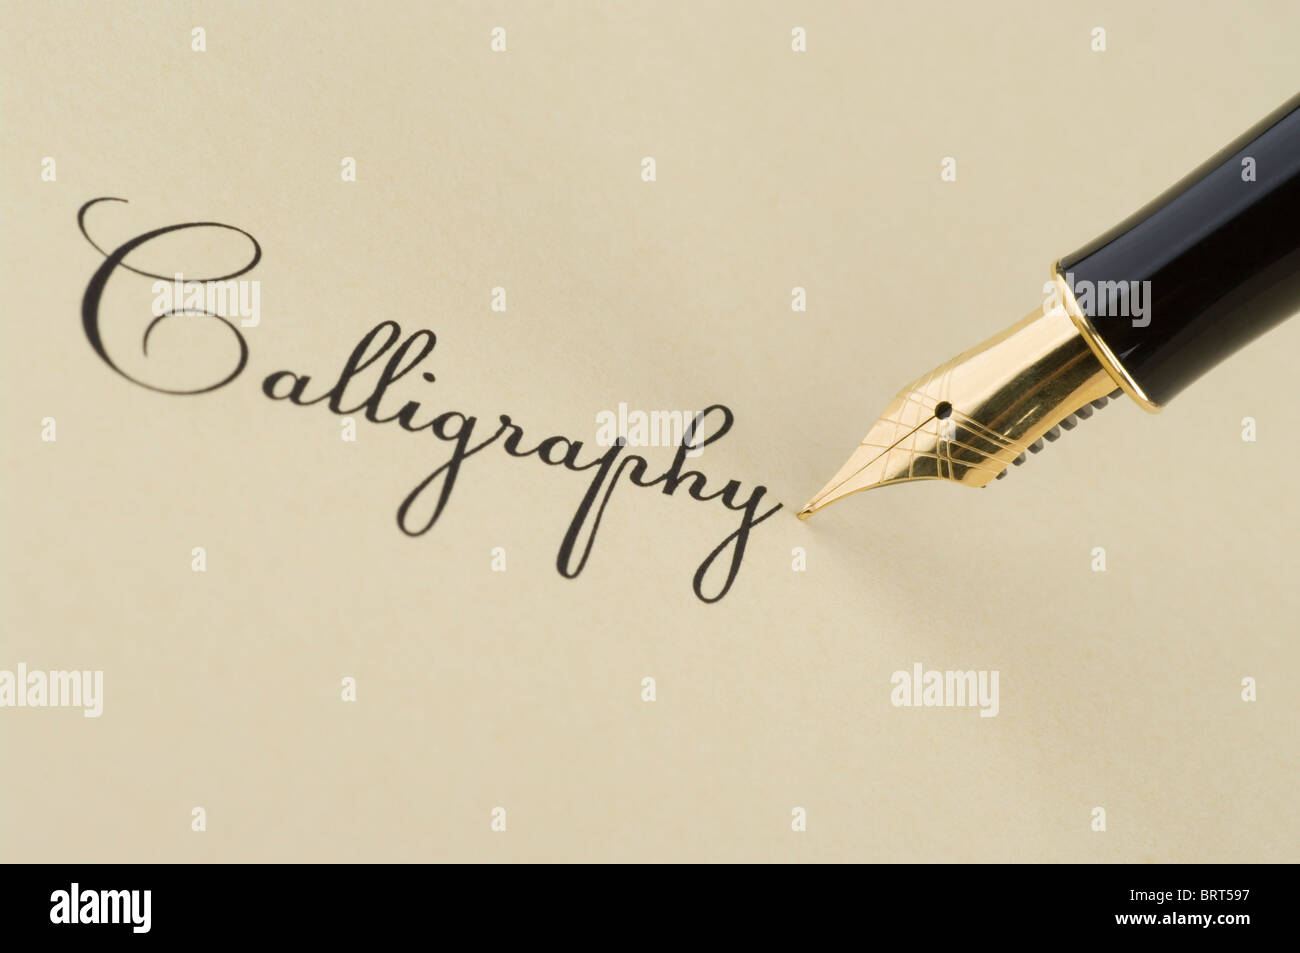 Inscription Calligraphy with gold pen Stock Photo